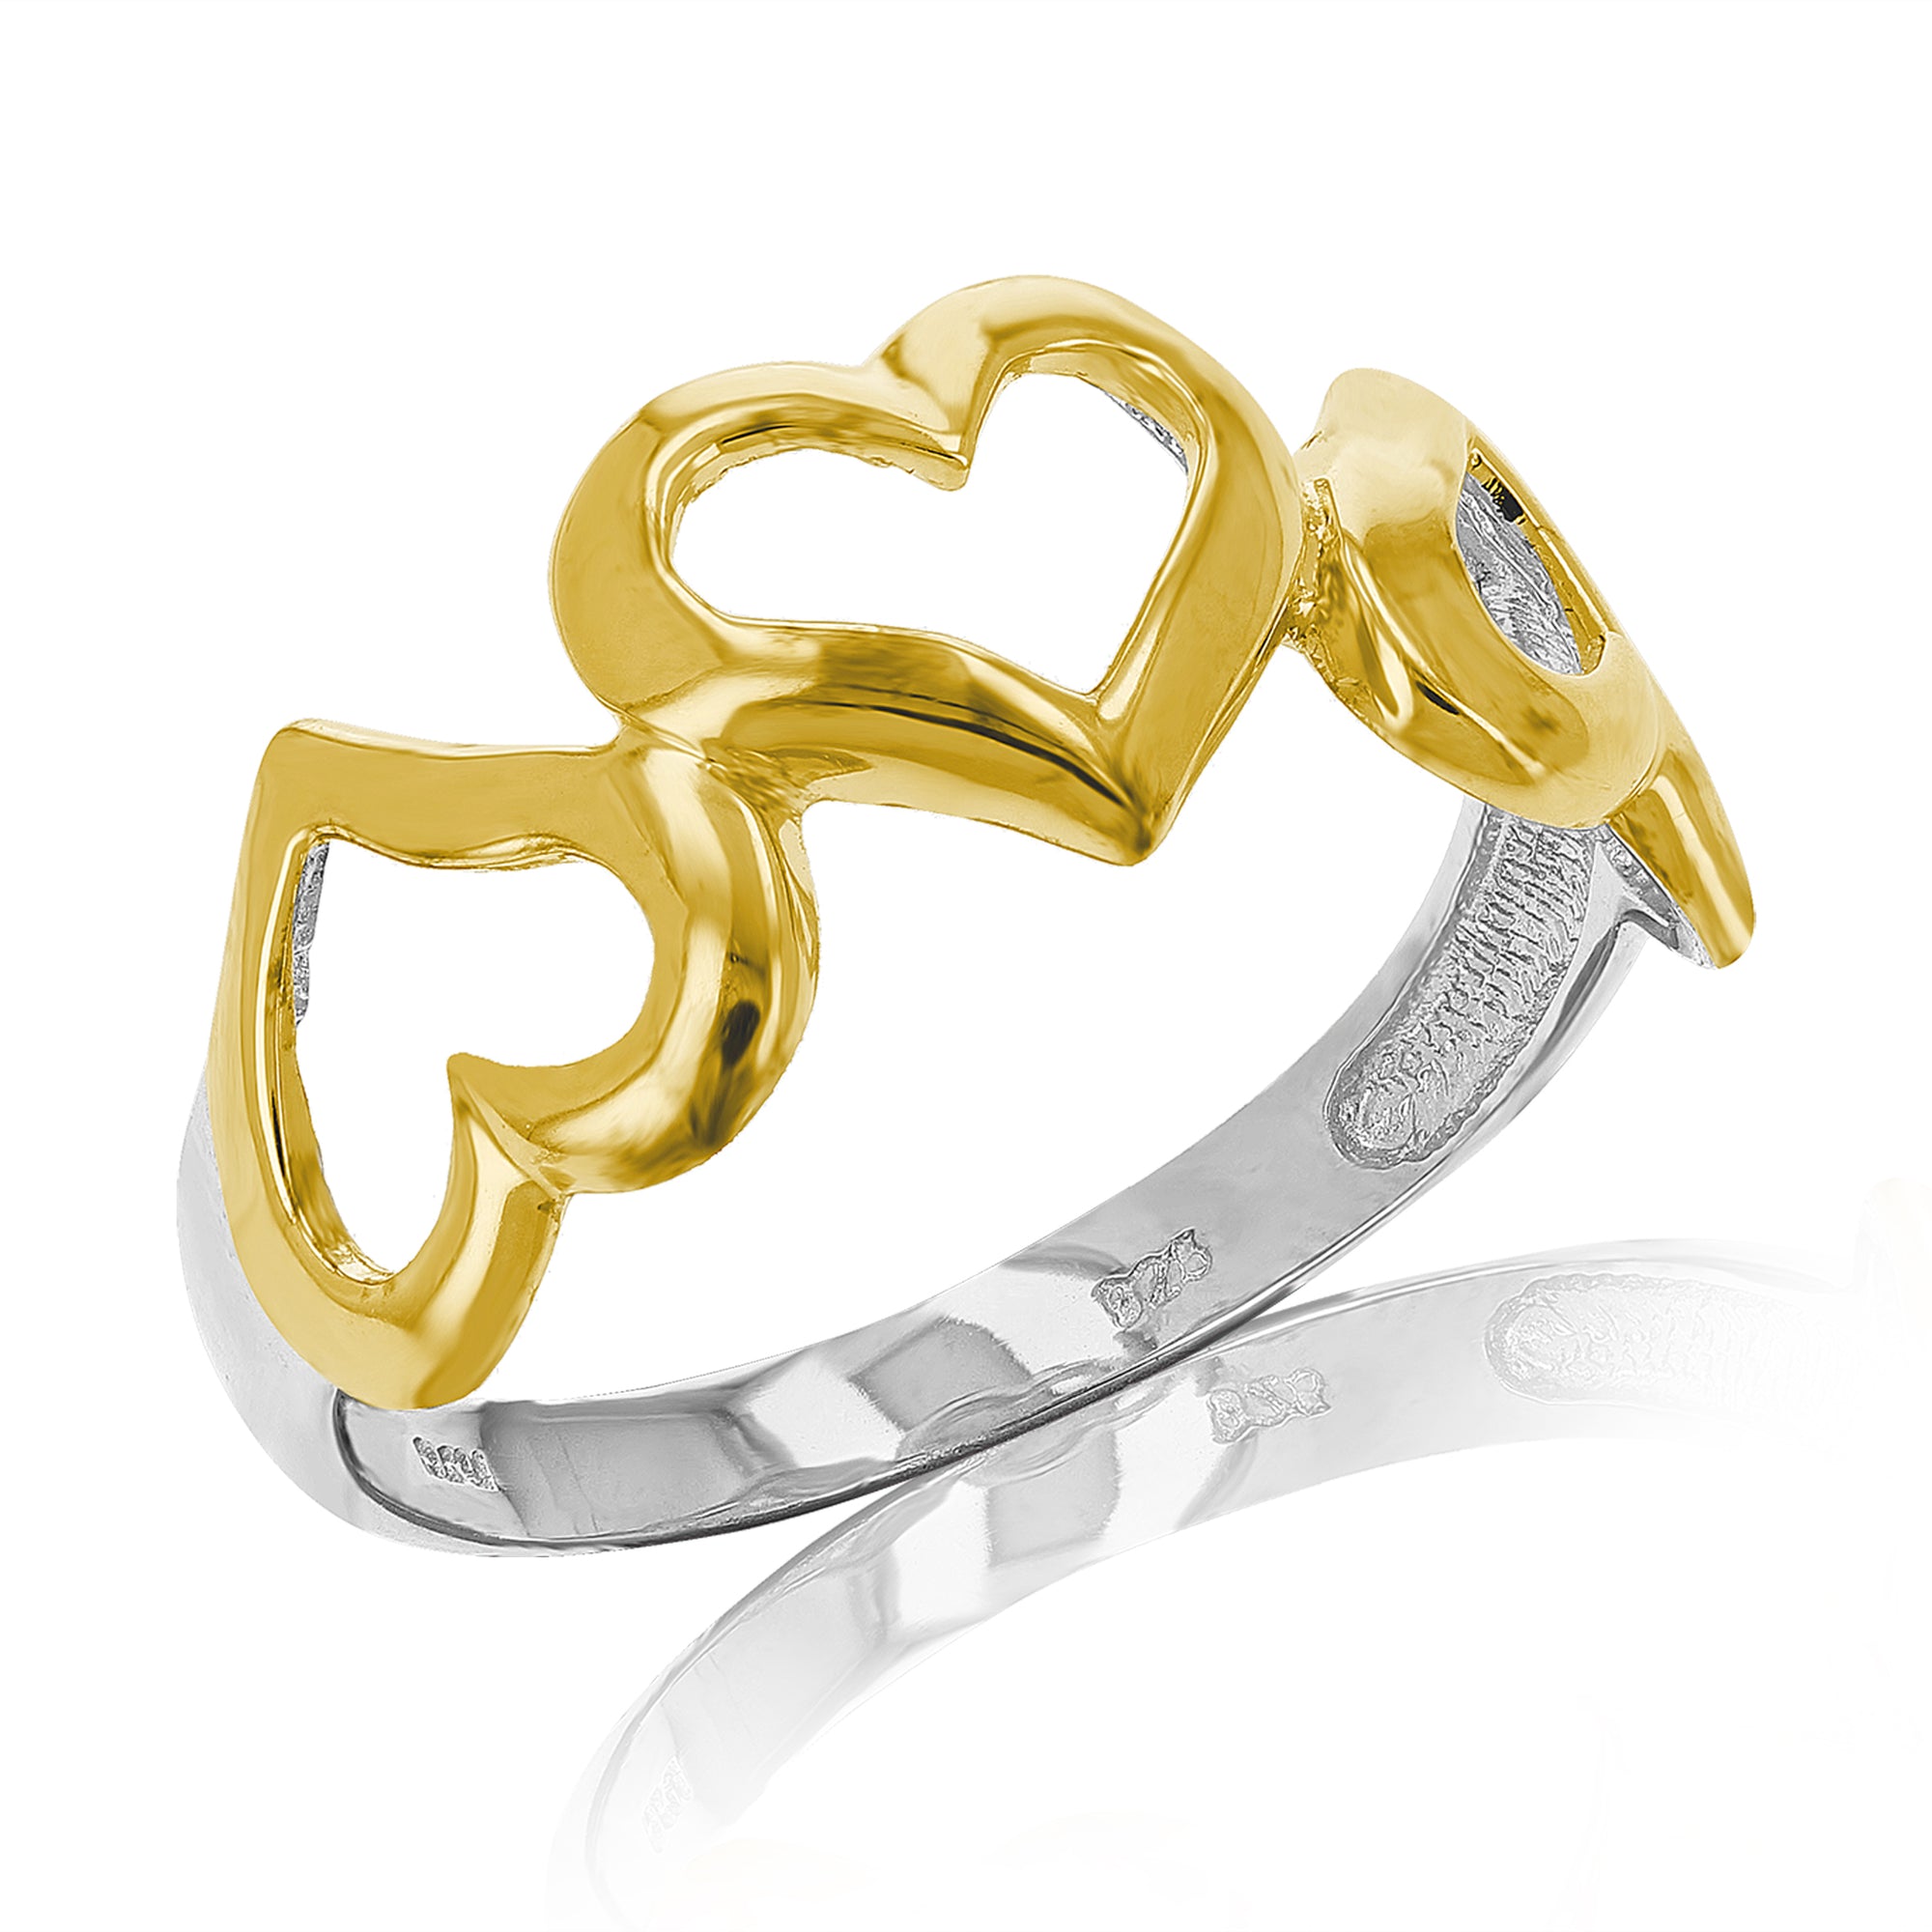 3 Hearts Fashion Ring in Yellow Gold Plated over .925 Sterling Silver